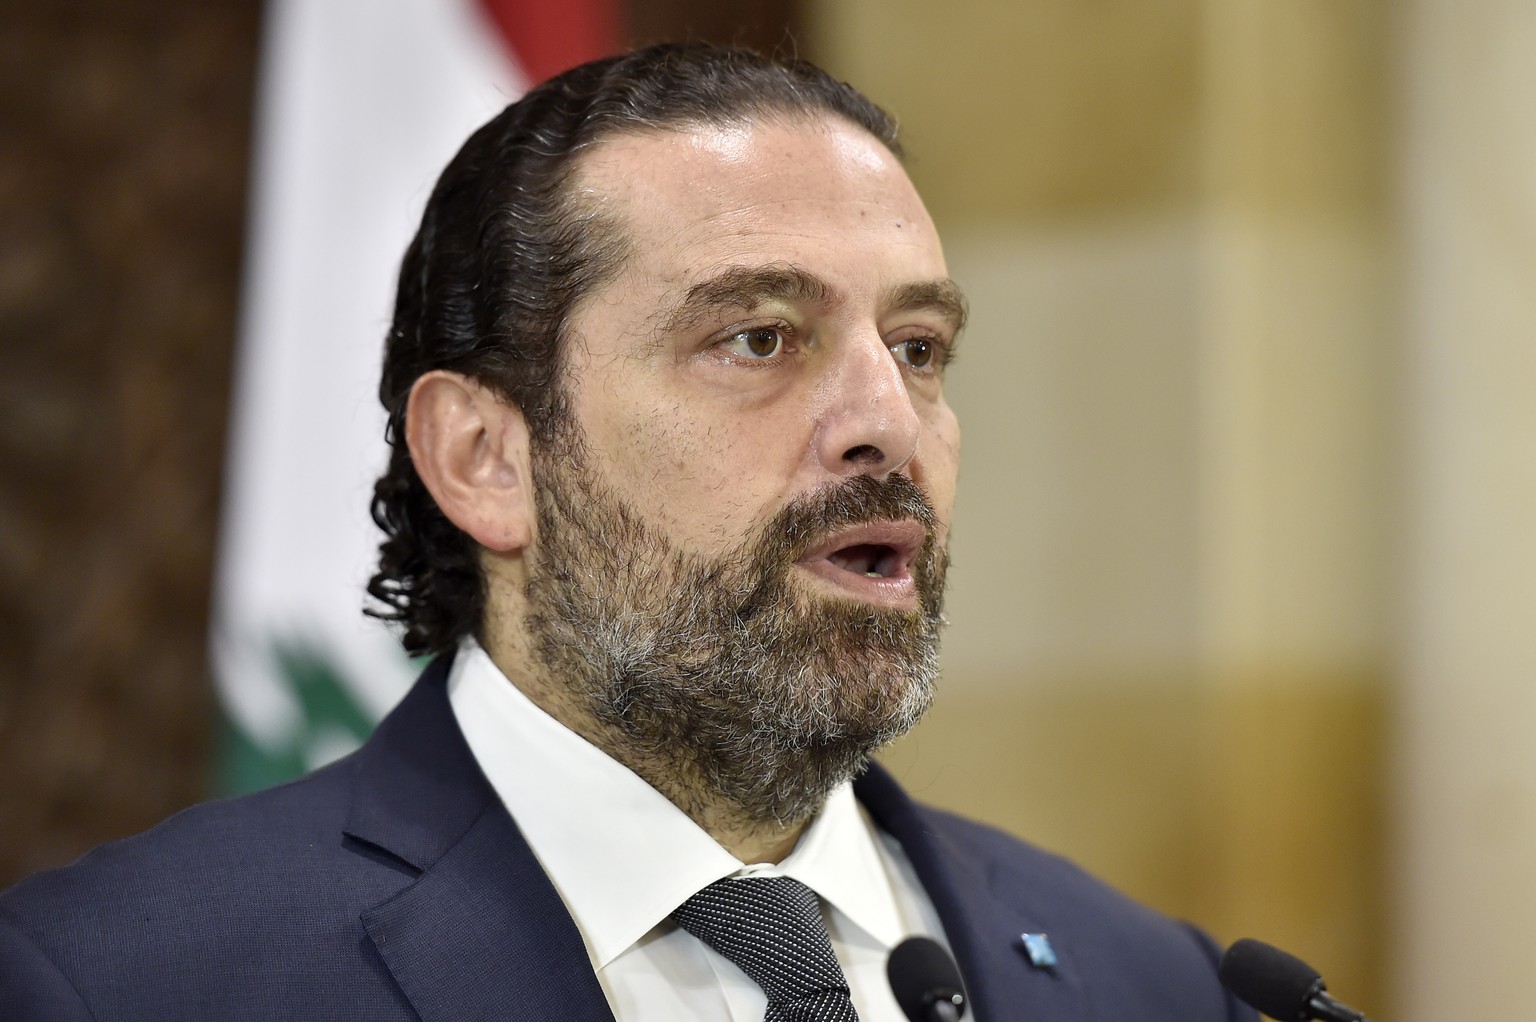 epa07930886 Lebanese Prime Minister Saad Hariri speaks during a press conference in the Government palace at downtown Beirut, Lebanon, 18 October 2019. Hariri gives political parties 72 hours to agree ...